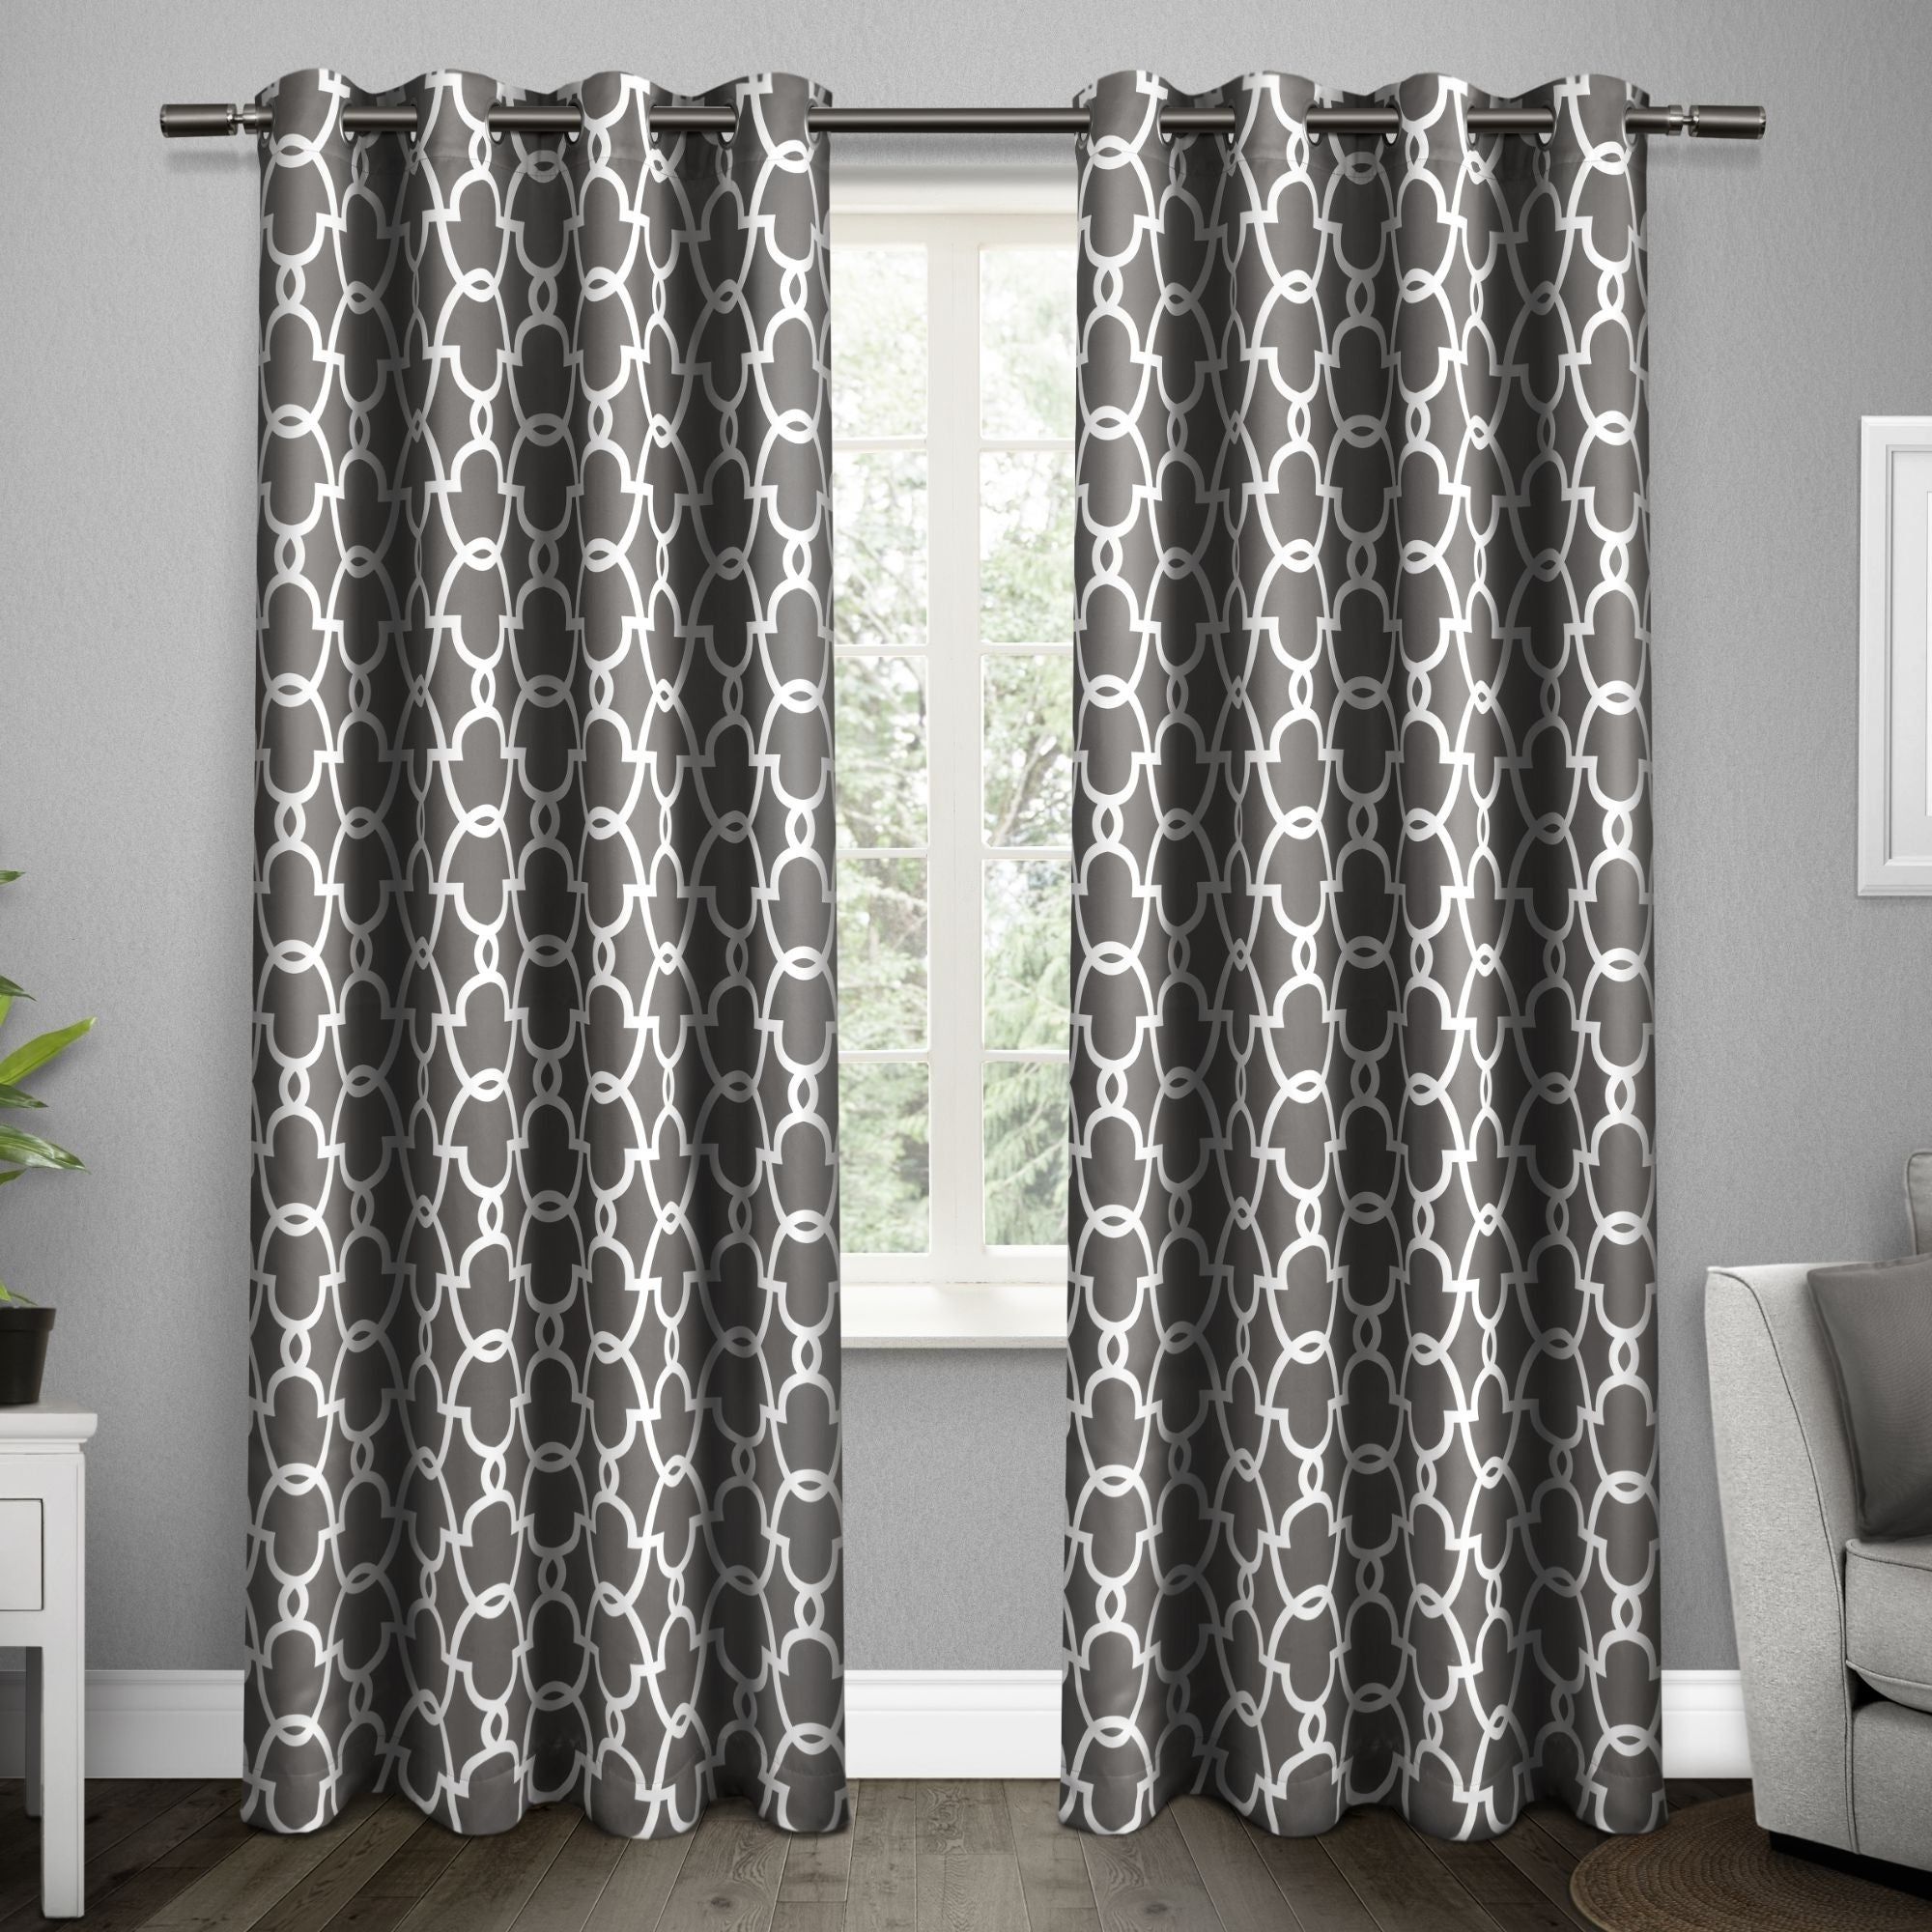 Fashionable The Curated Nomad Vicksburg Thermal Woven Blackout Grommet Top Curtain  Panel Pair Pertaining To The Curated Nomad Duane Blackout Curtain Panel Pairs (View 6 of 20)